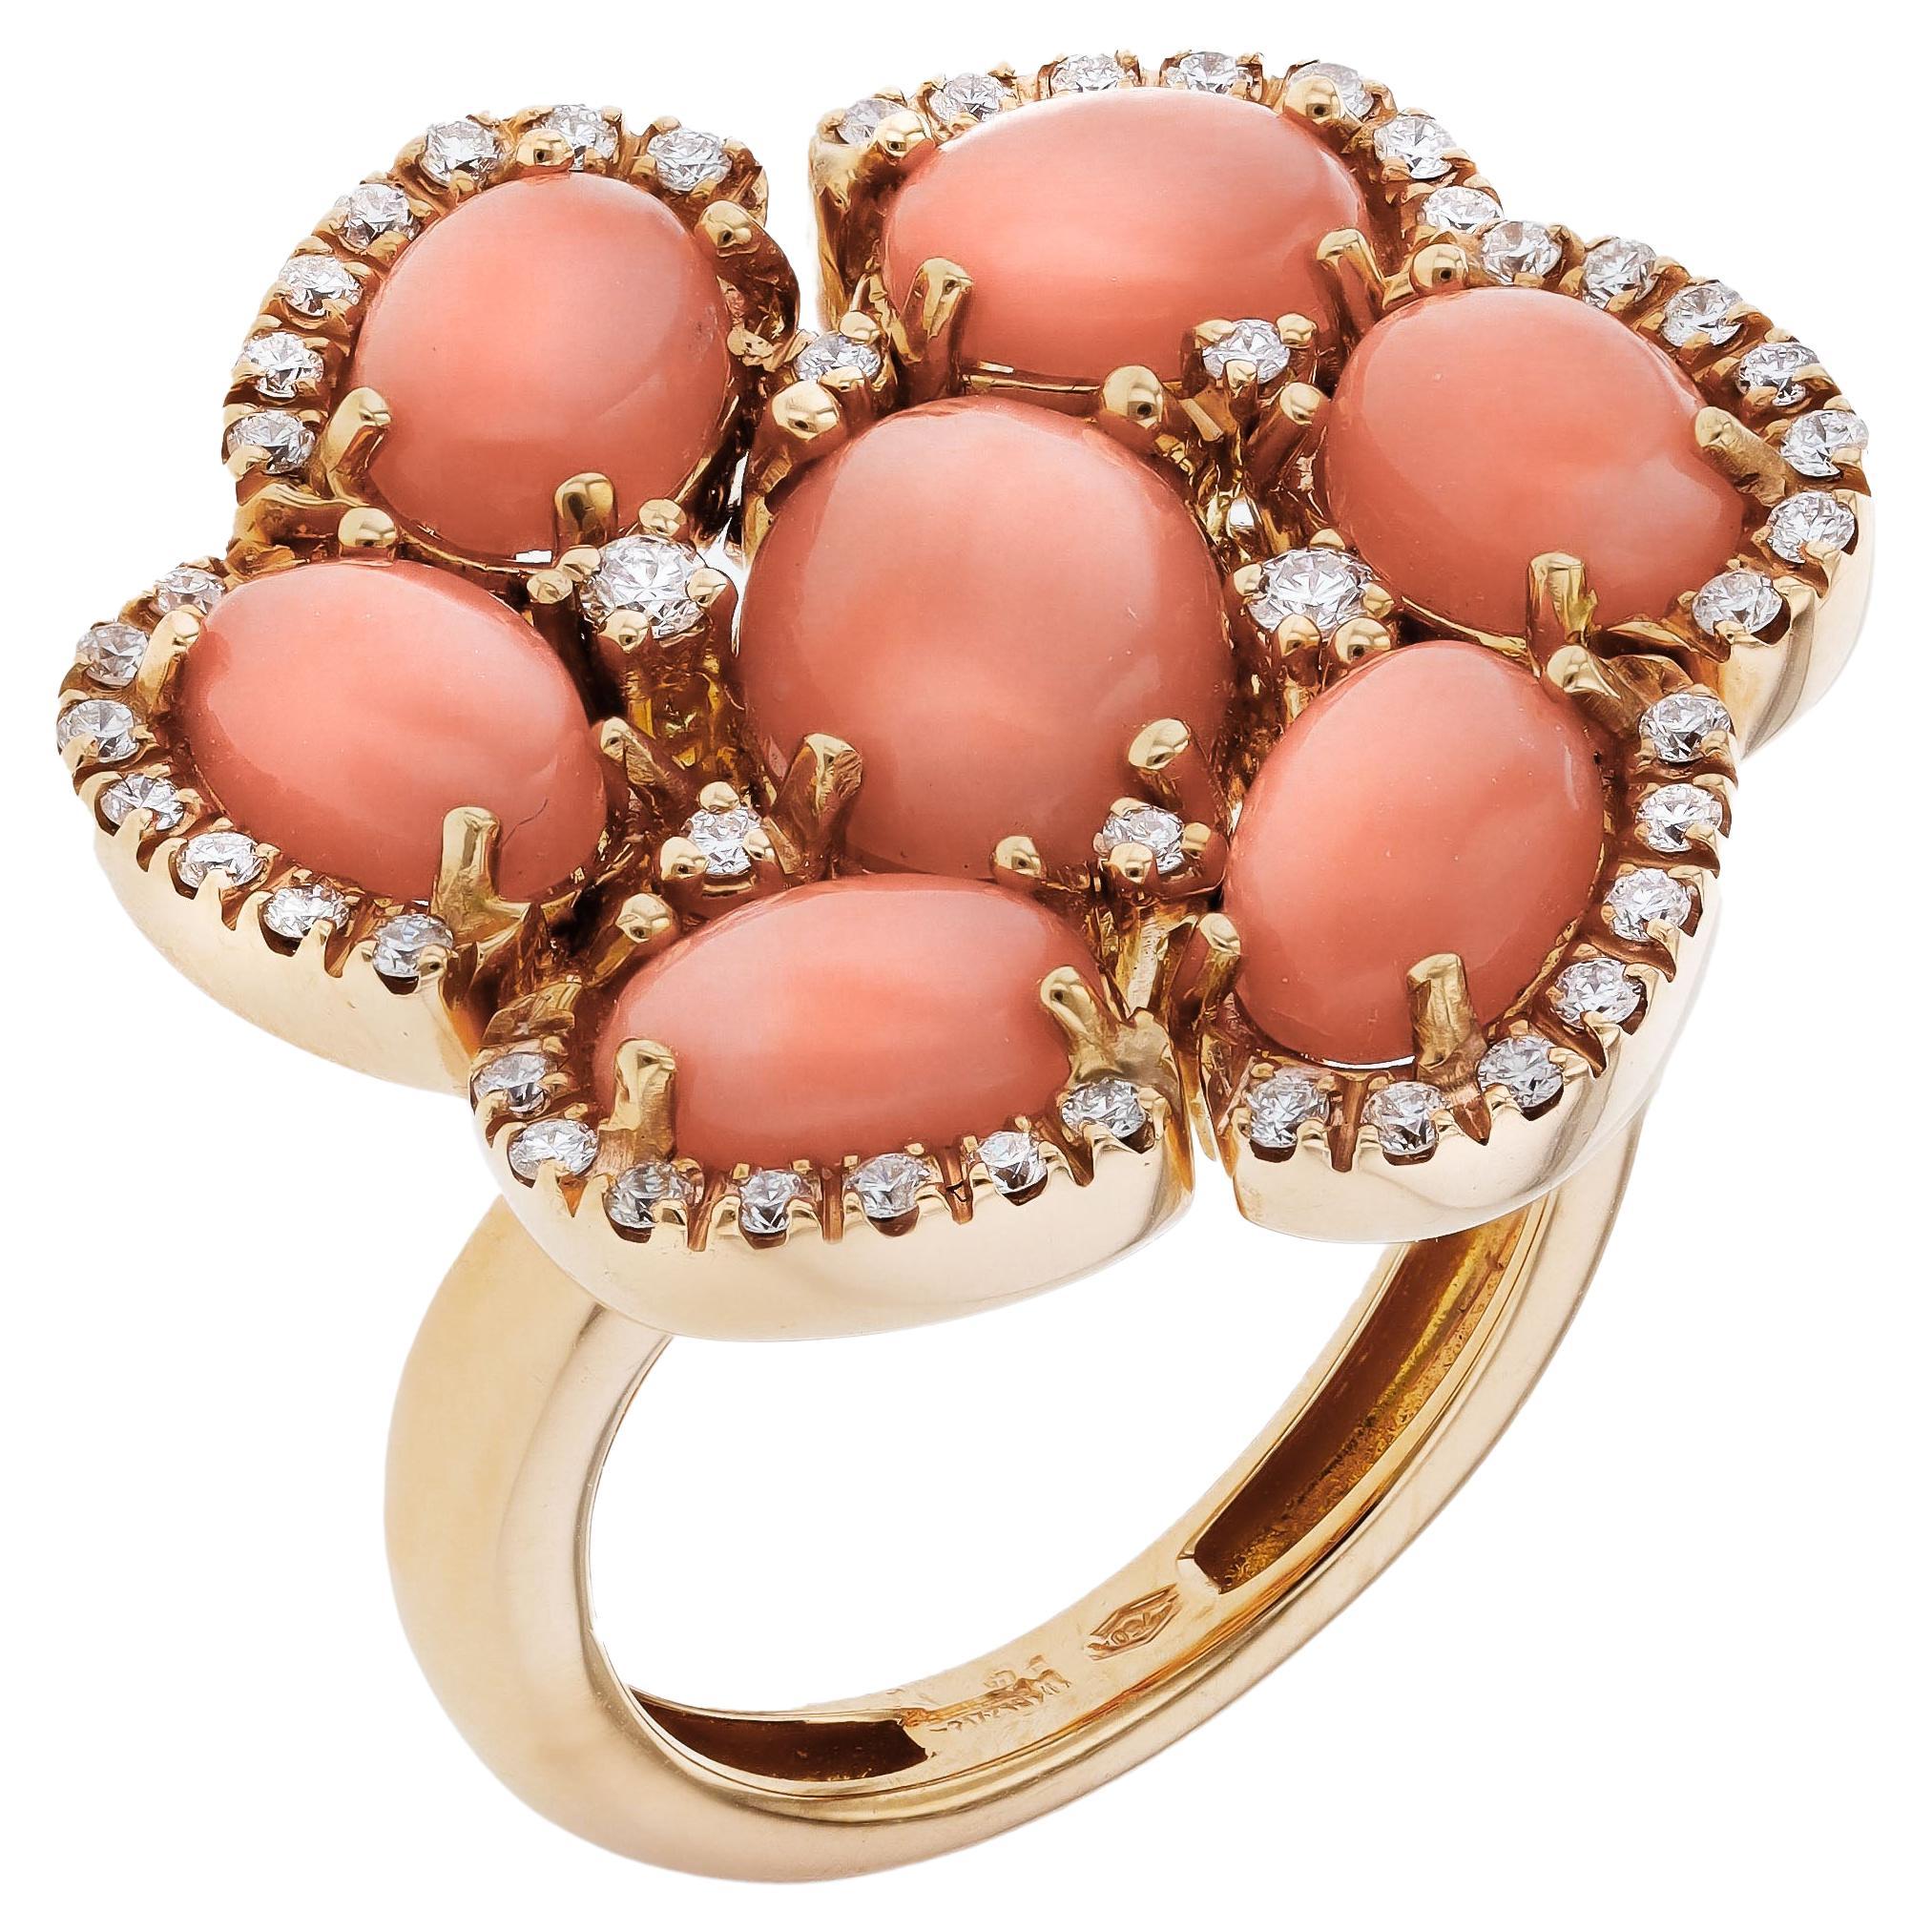 Zydo 18K Yellow Gold Diamond and Coral Petals Ring Sz 7.5 For Sale